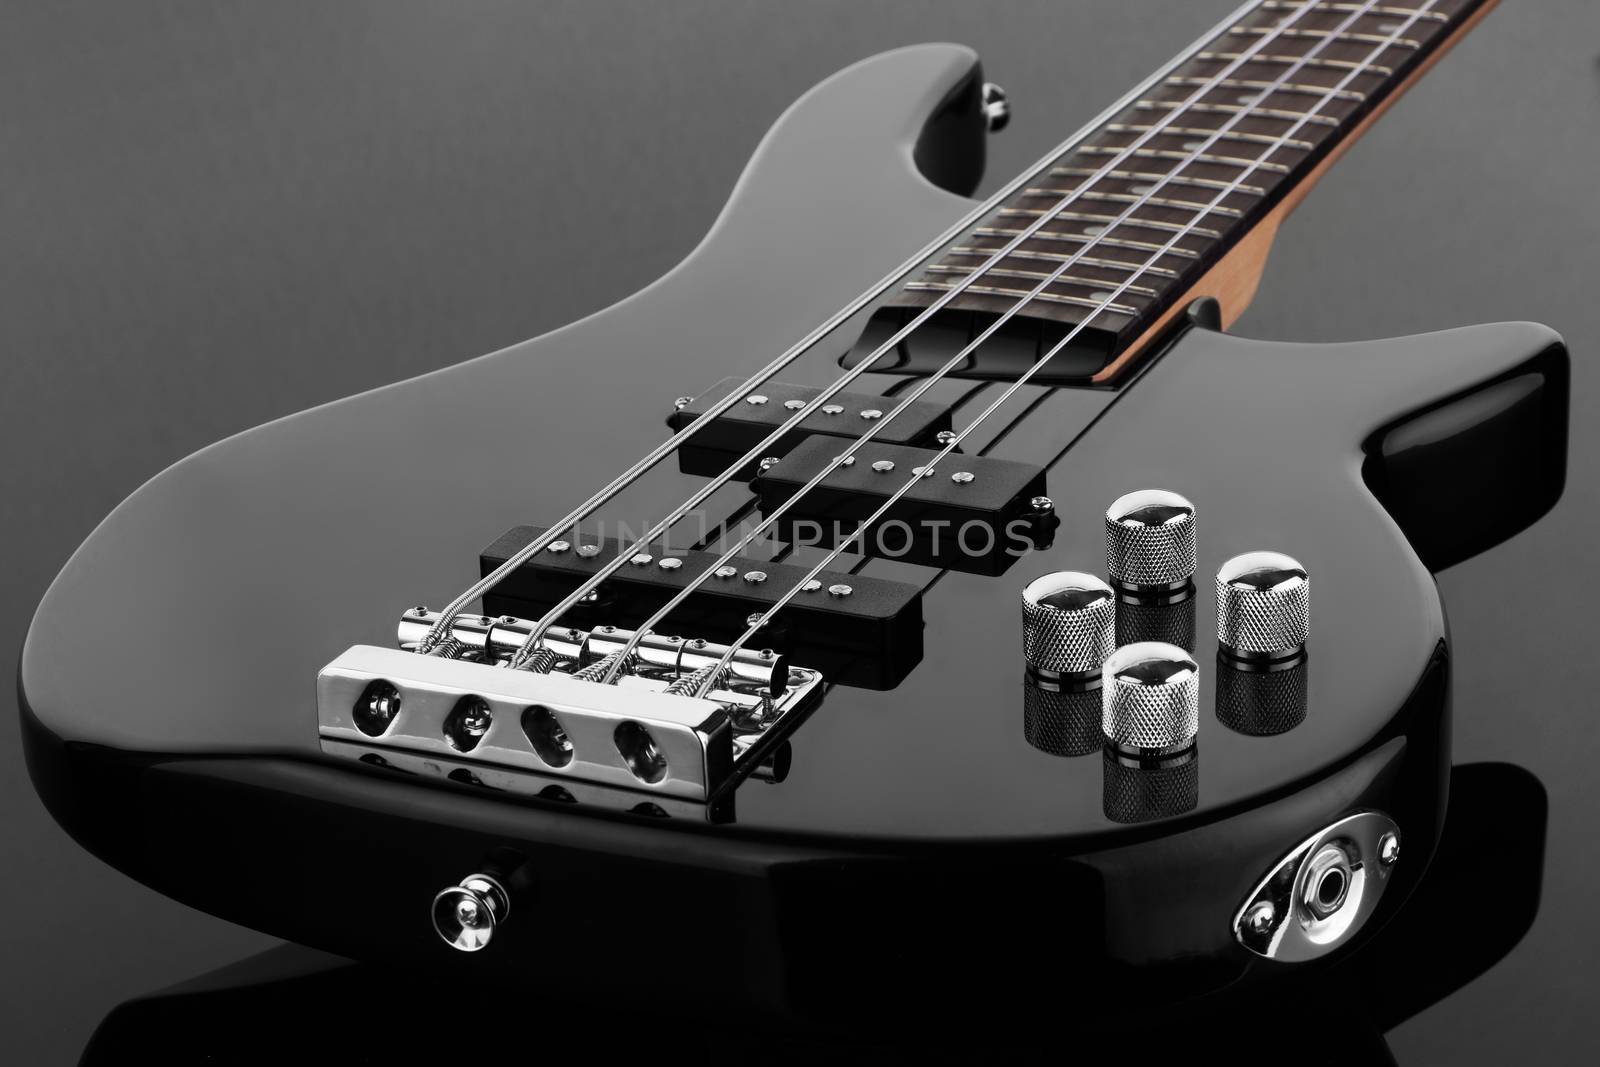 The body of black electric bass guitar on dark background